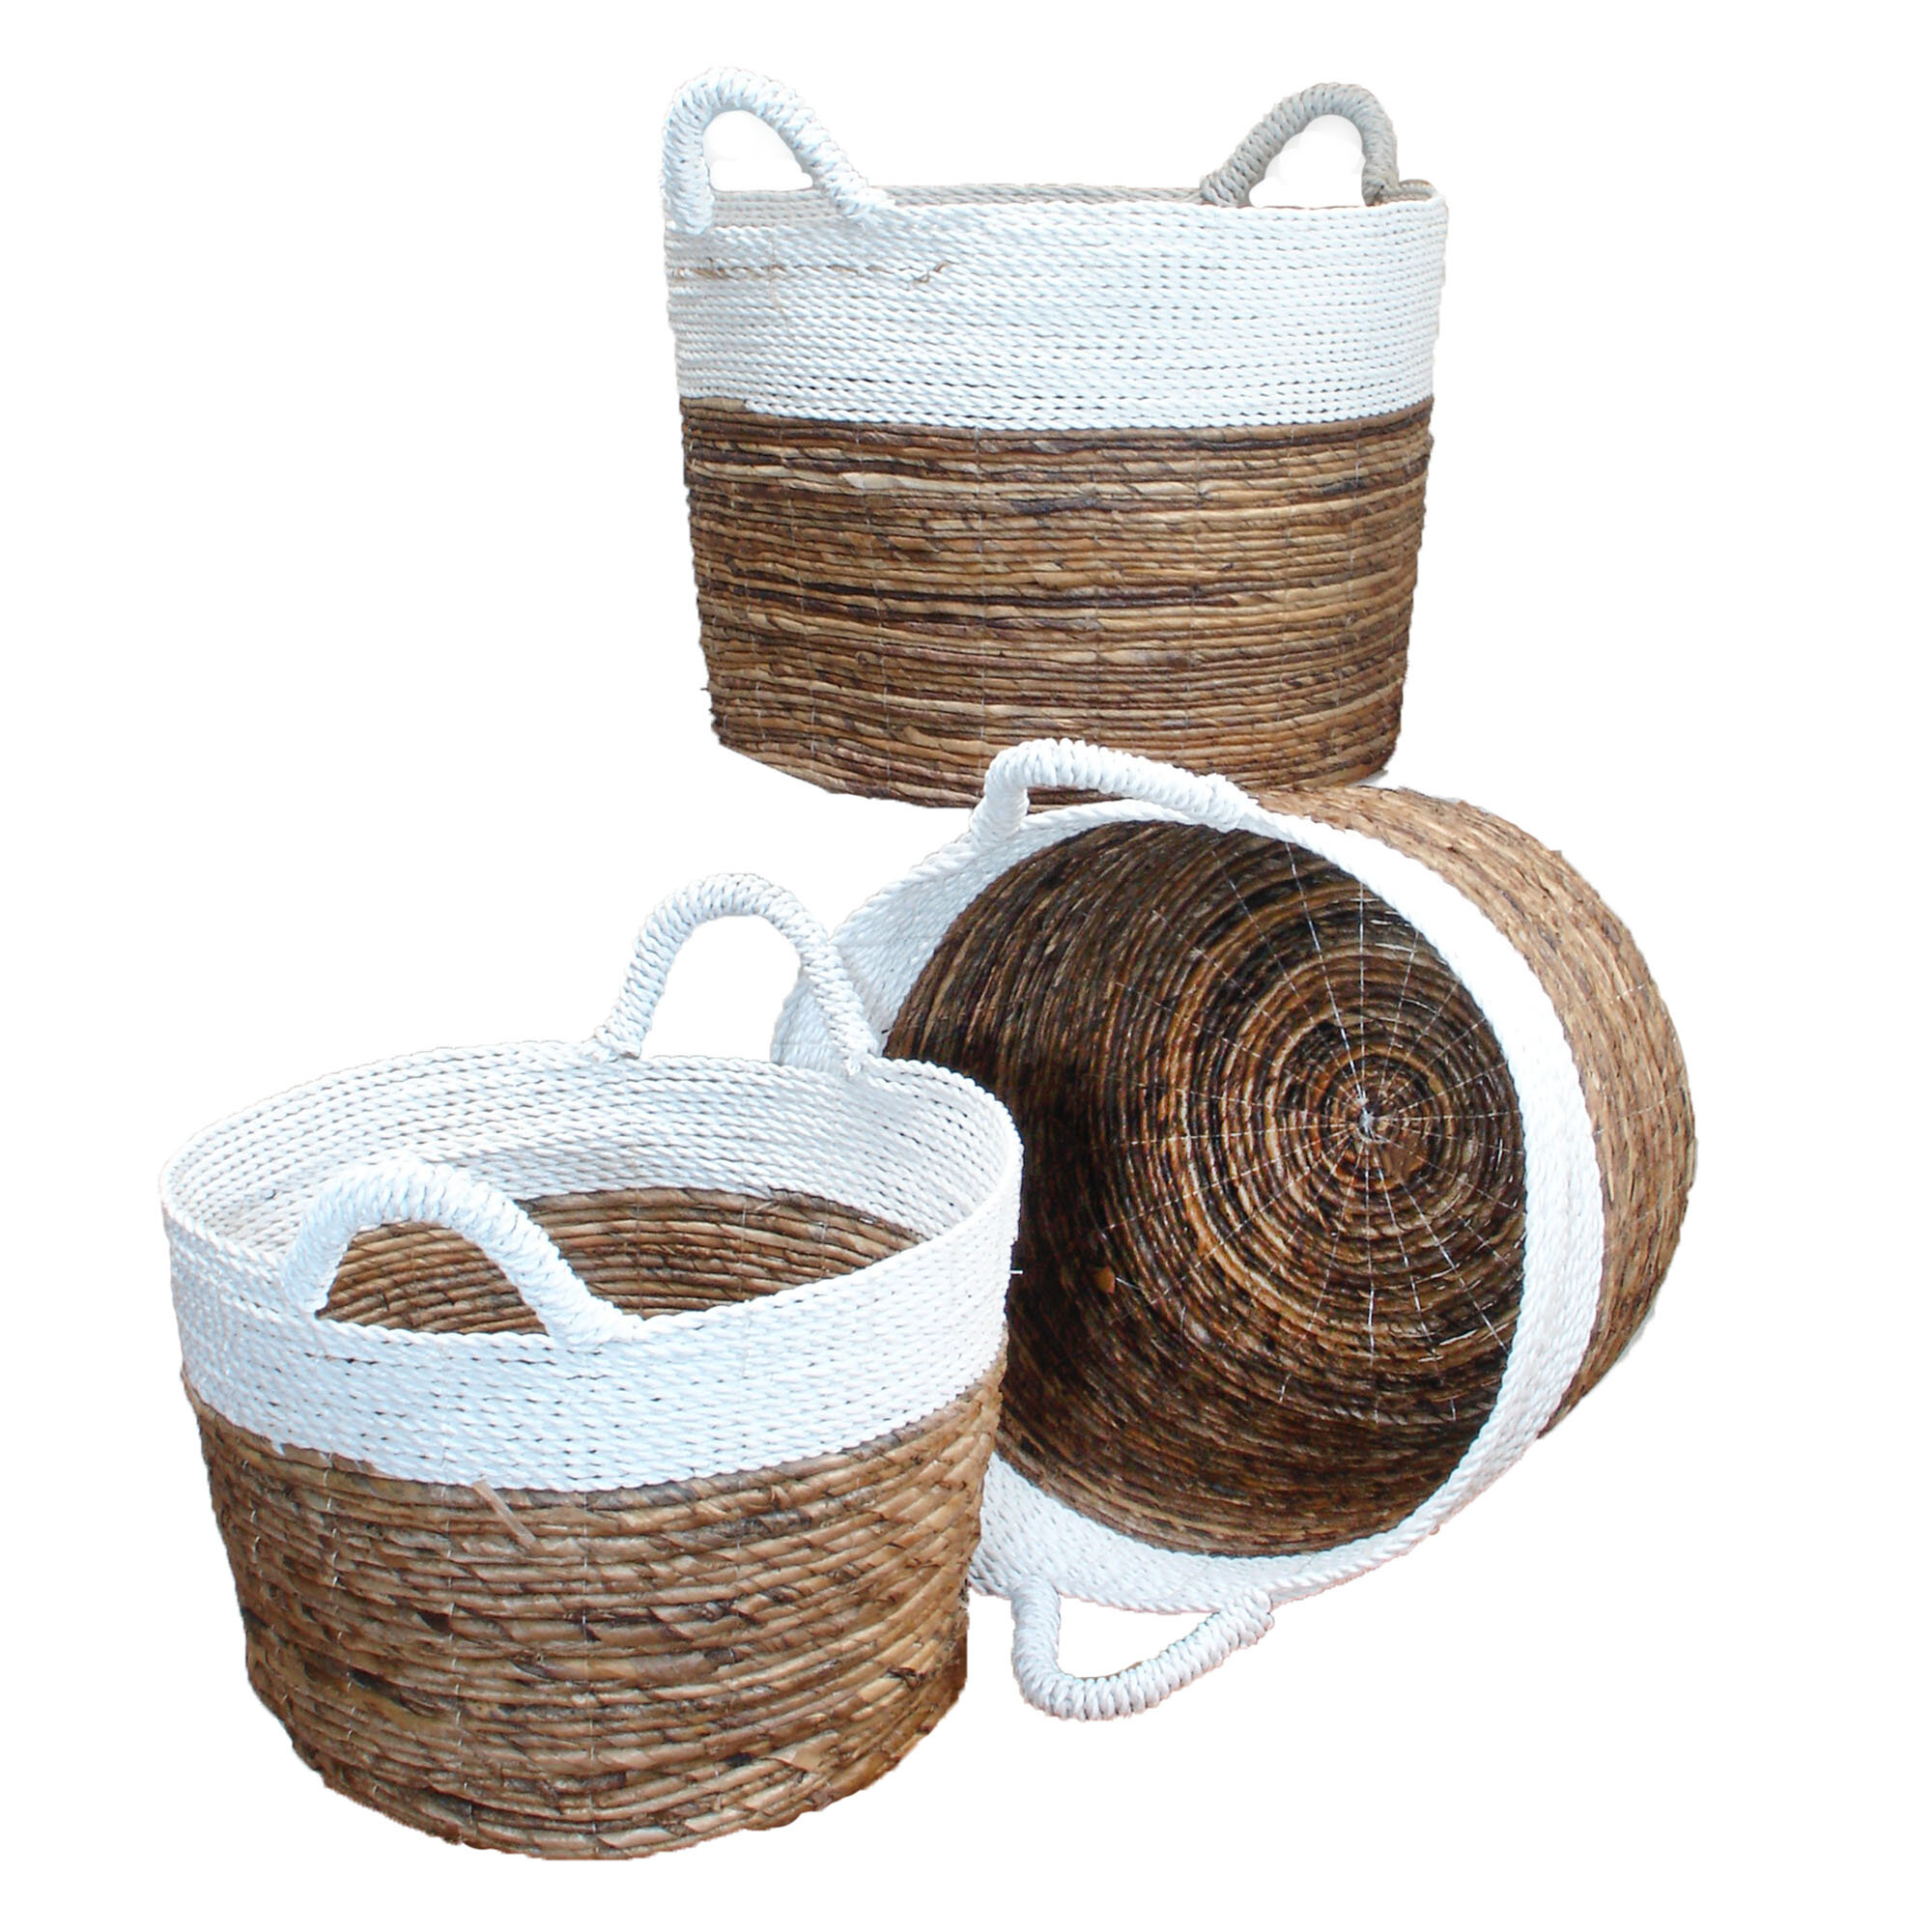 SET OF 3 RATTAN CANE SMALL ROUND BASKETS 